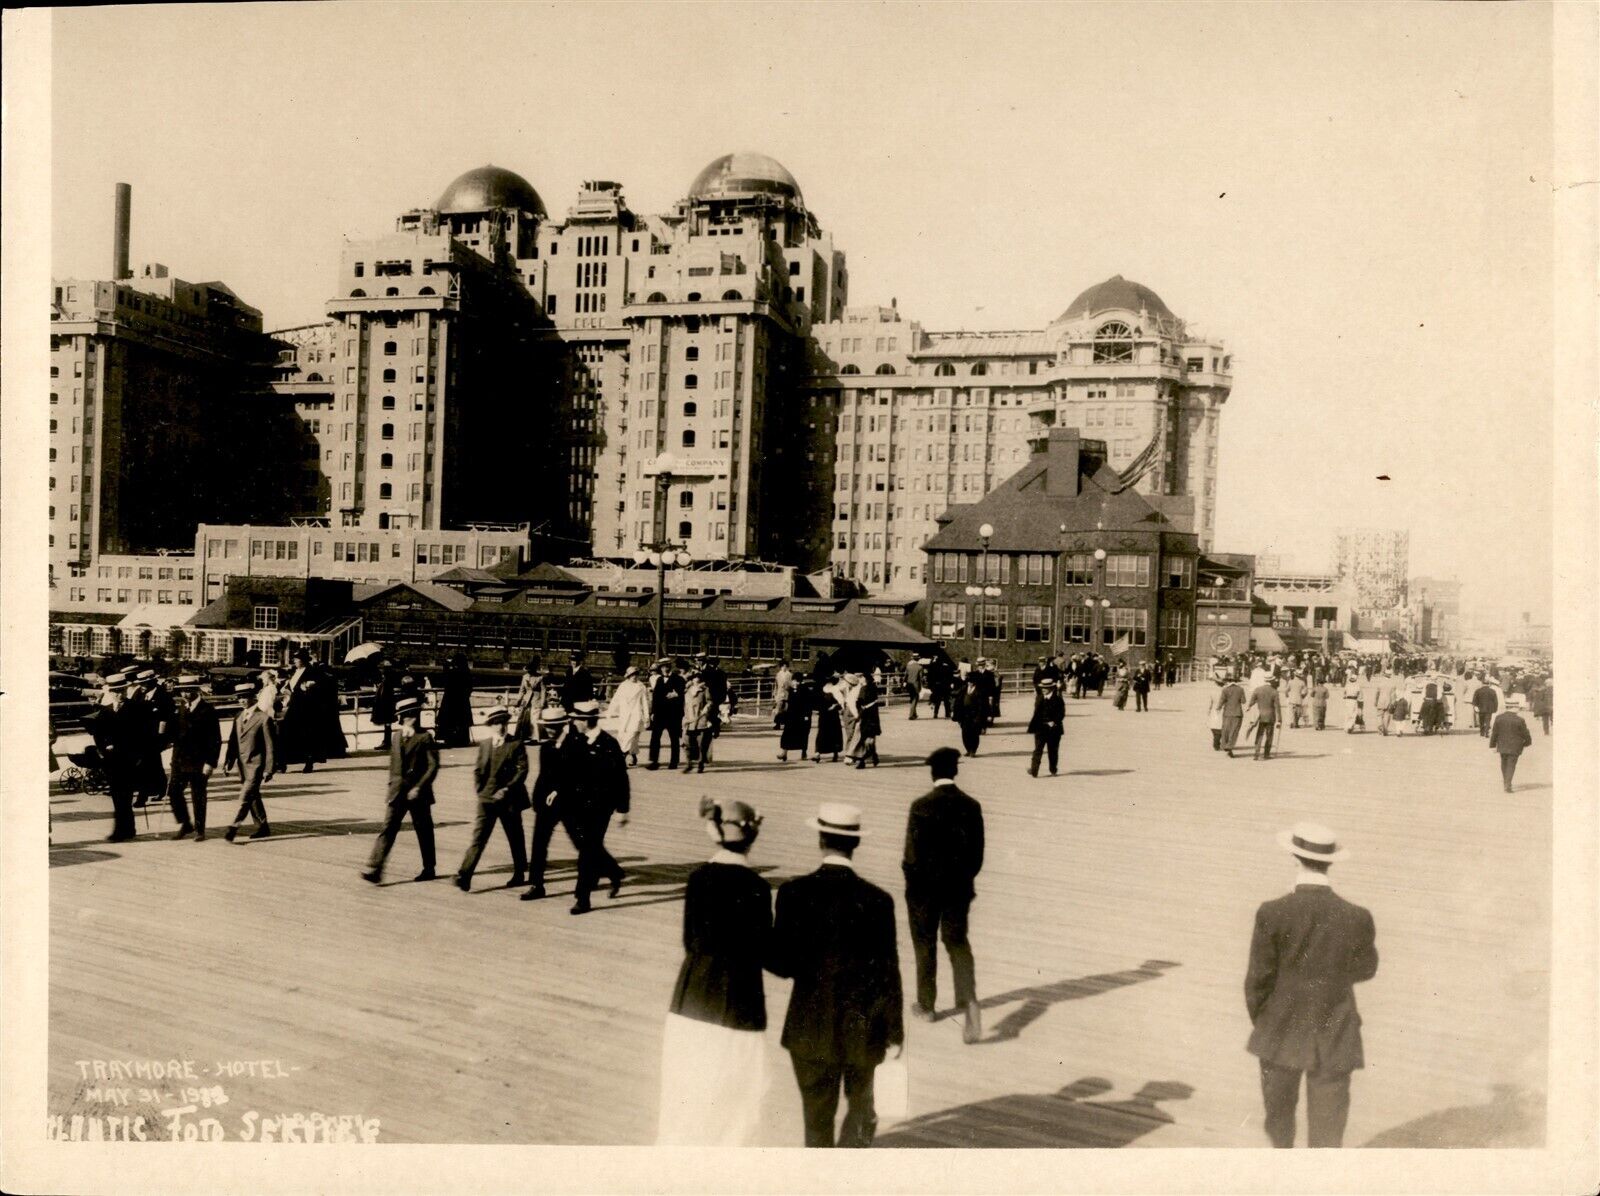 LD354 1915 Original Photo ATLANTIC CITY BOARDWALK WITH NEARLY COMPLETED TRAYMORE